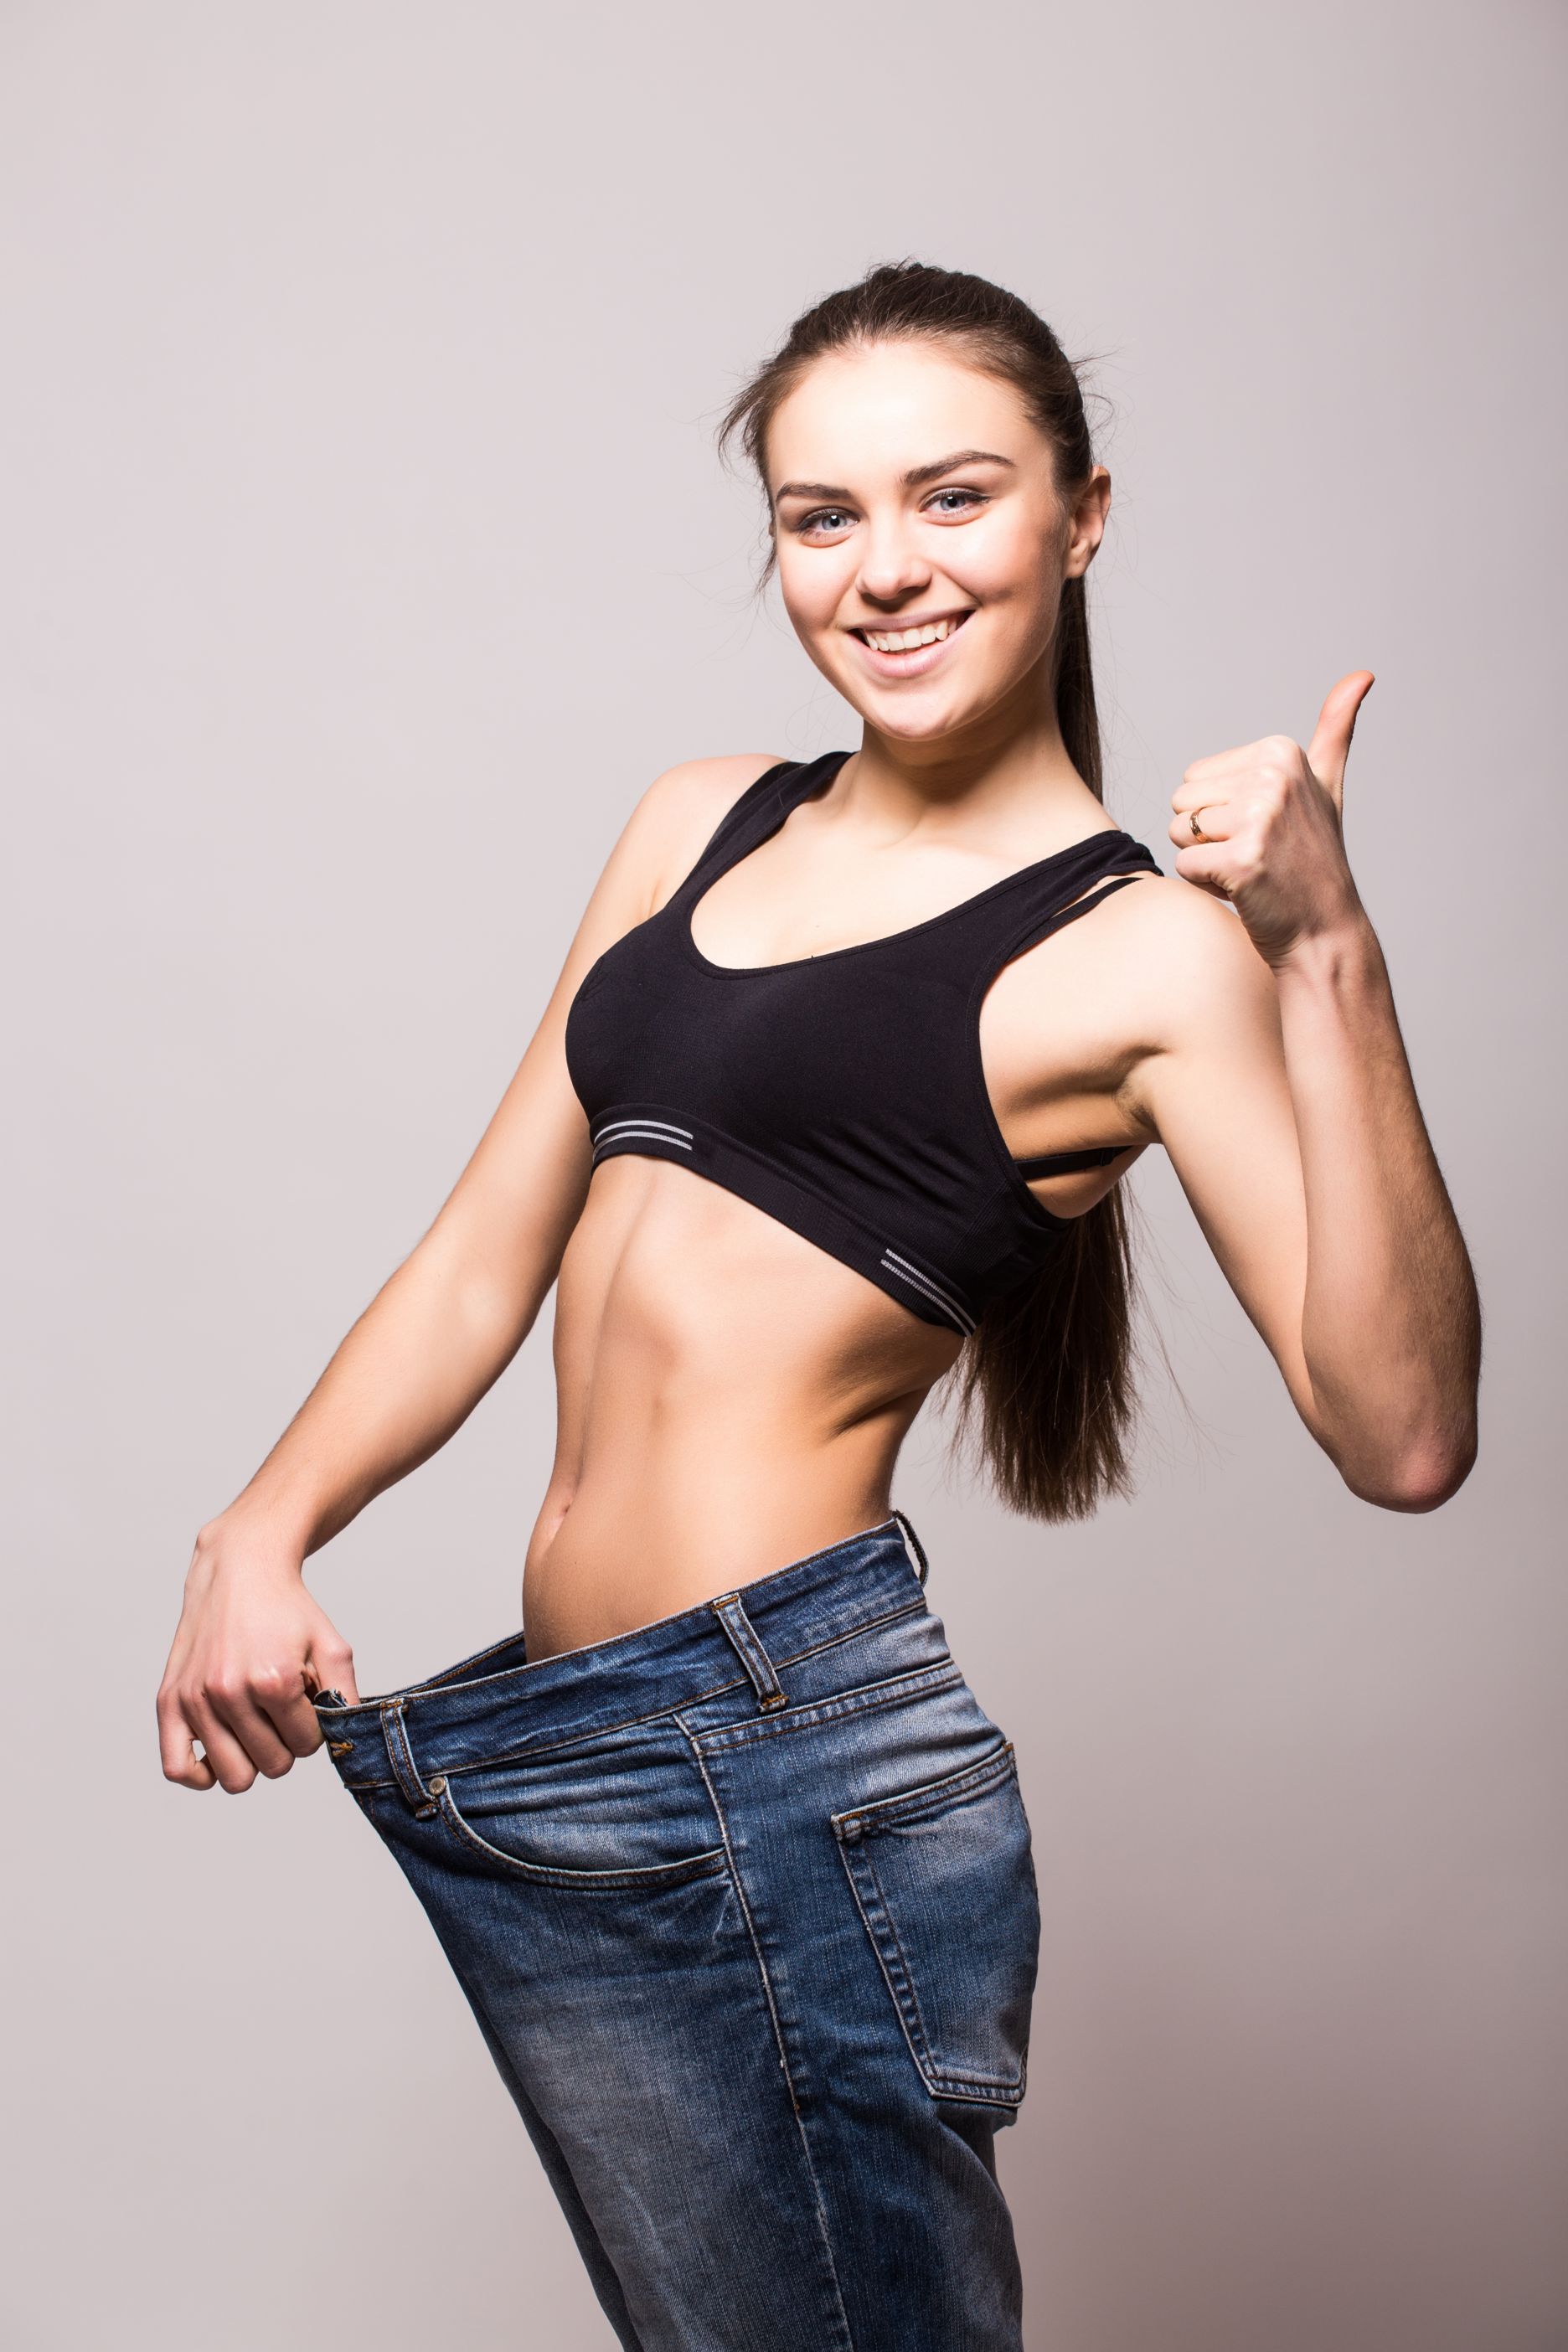 young-woman-shows-her-weight-loss-by-wearing-old-jeans.jpg